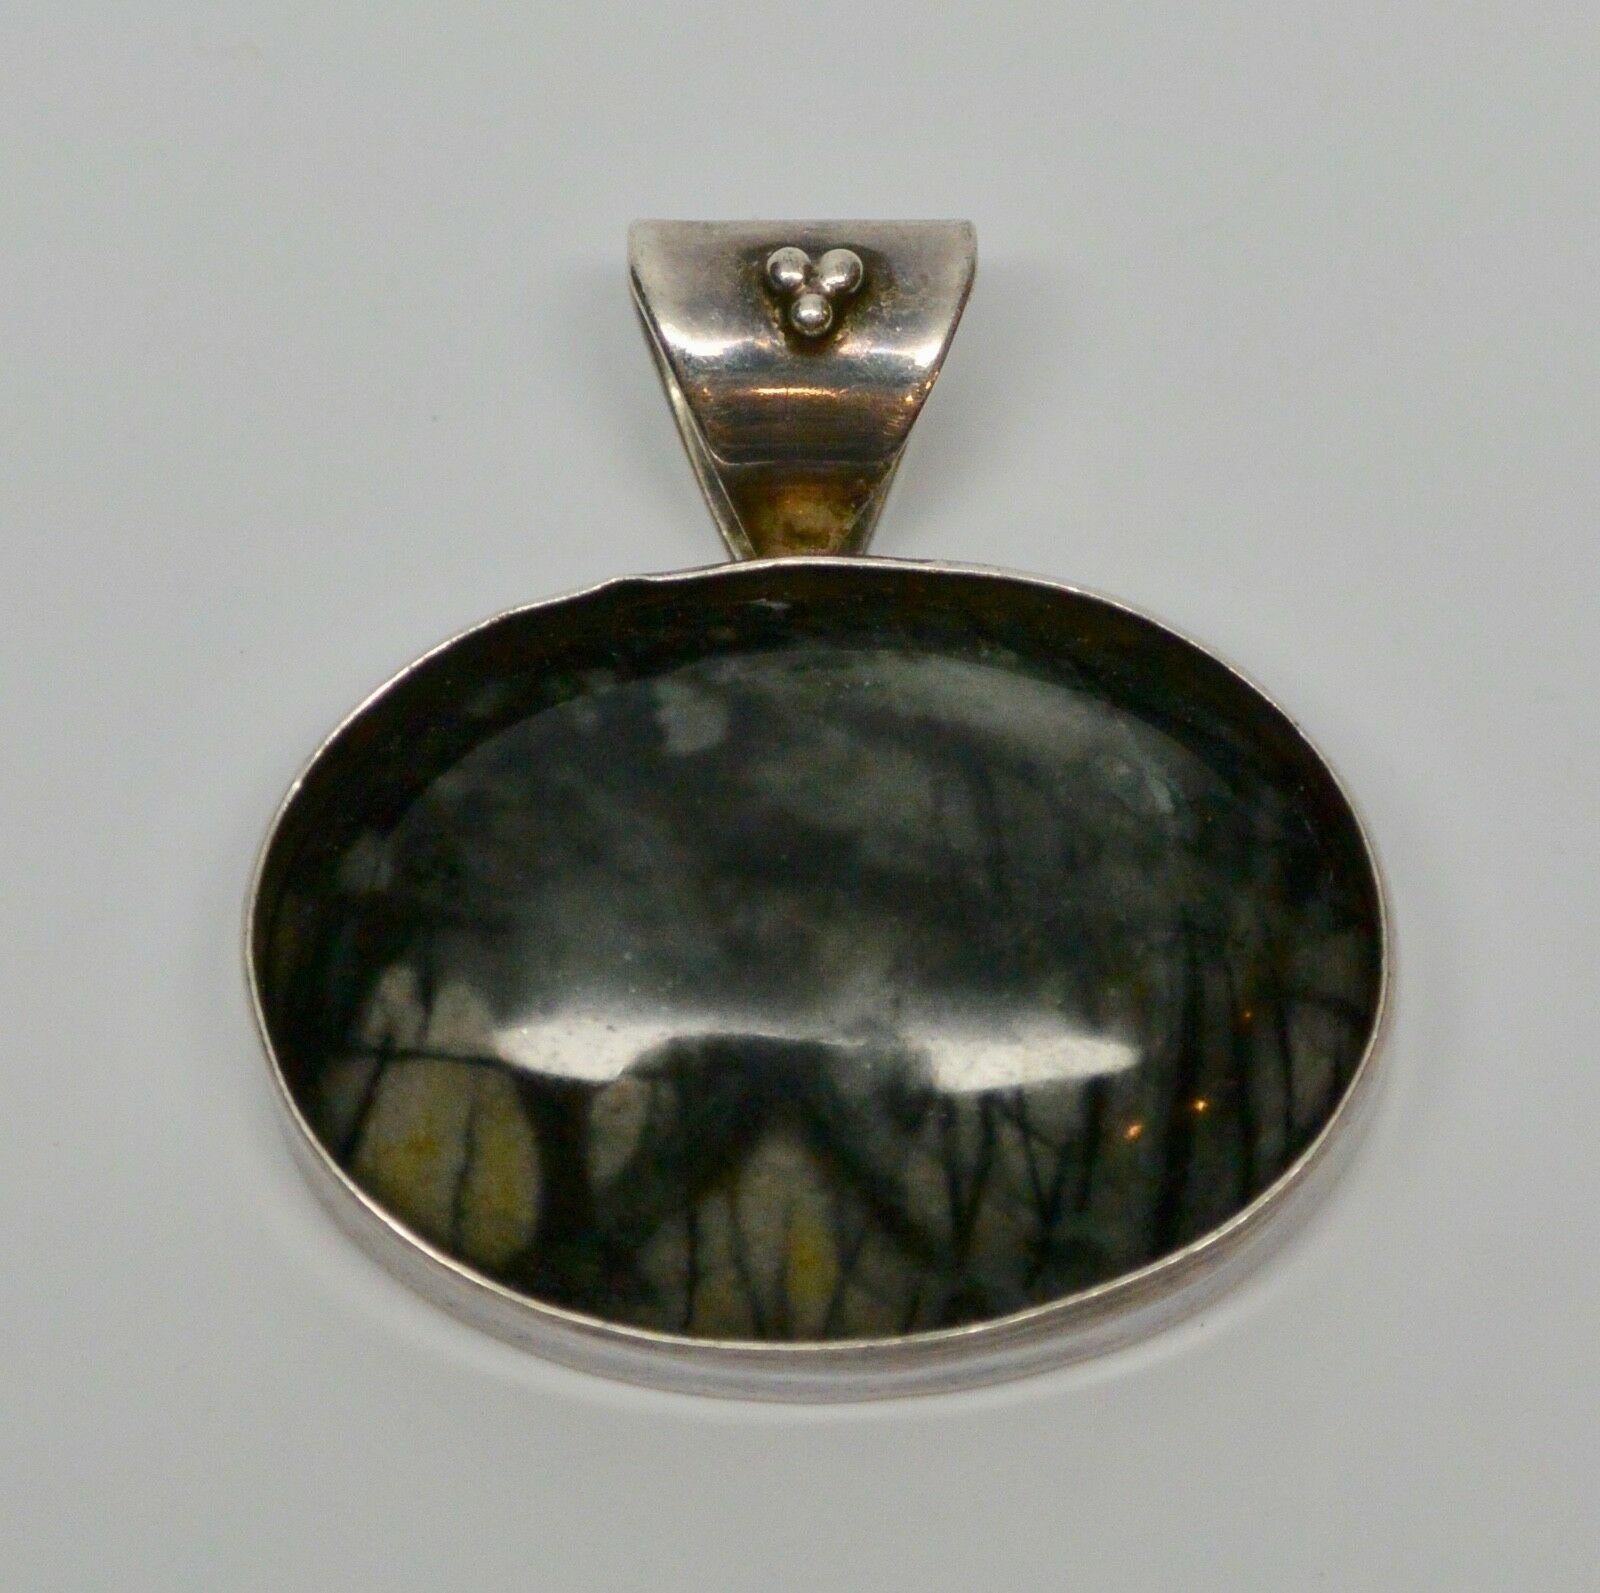 Native American Sterling Silver Oval Stone Pedant Signed R.J. Apacheto

Stone has rich black and gray coloring.

Marked: Sterling

Signed: R.J. Apacheto

Measurements:

1 5/16